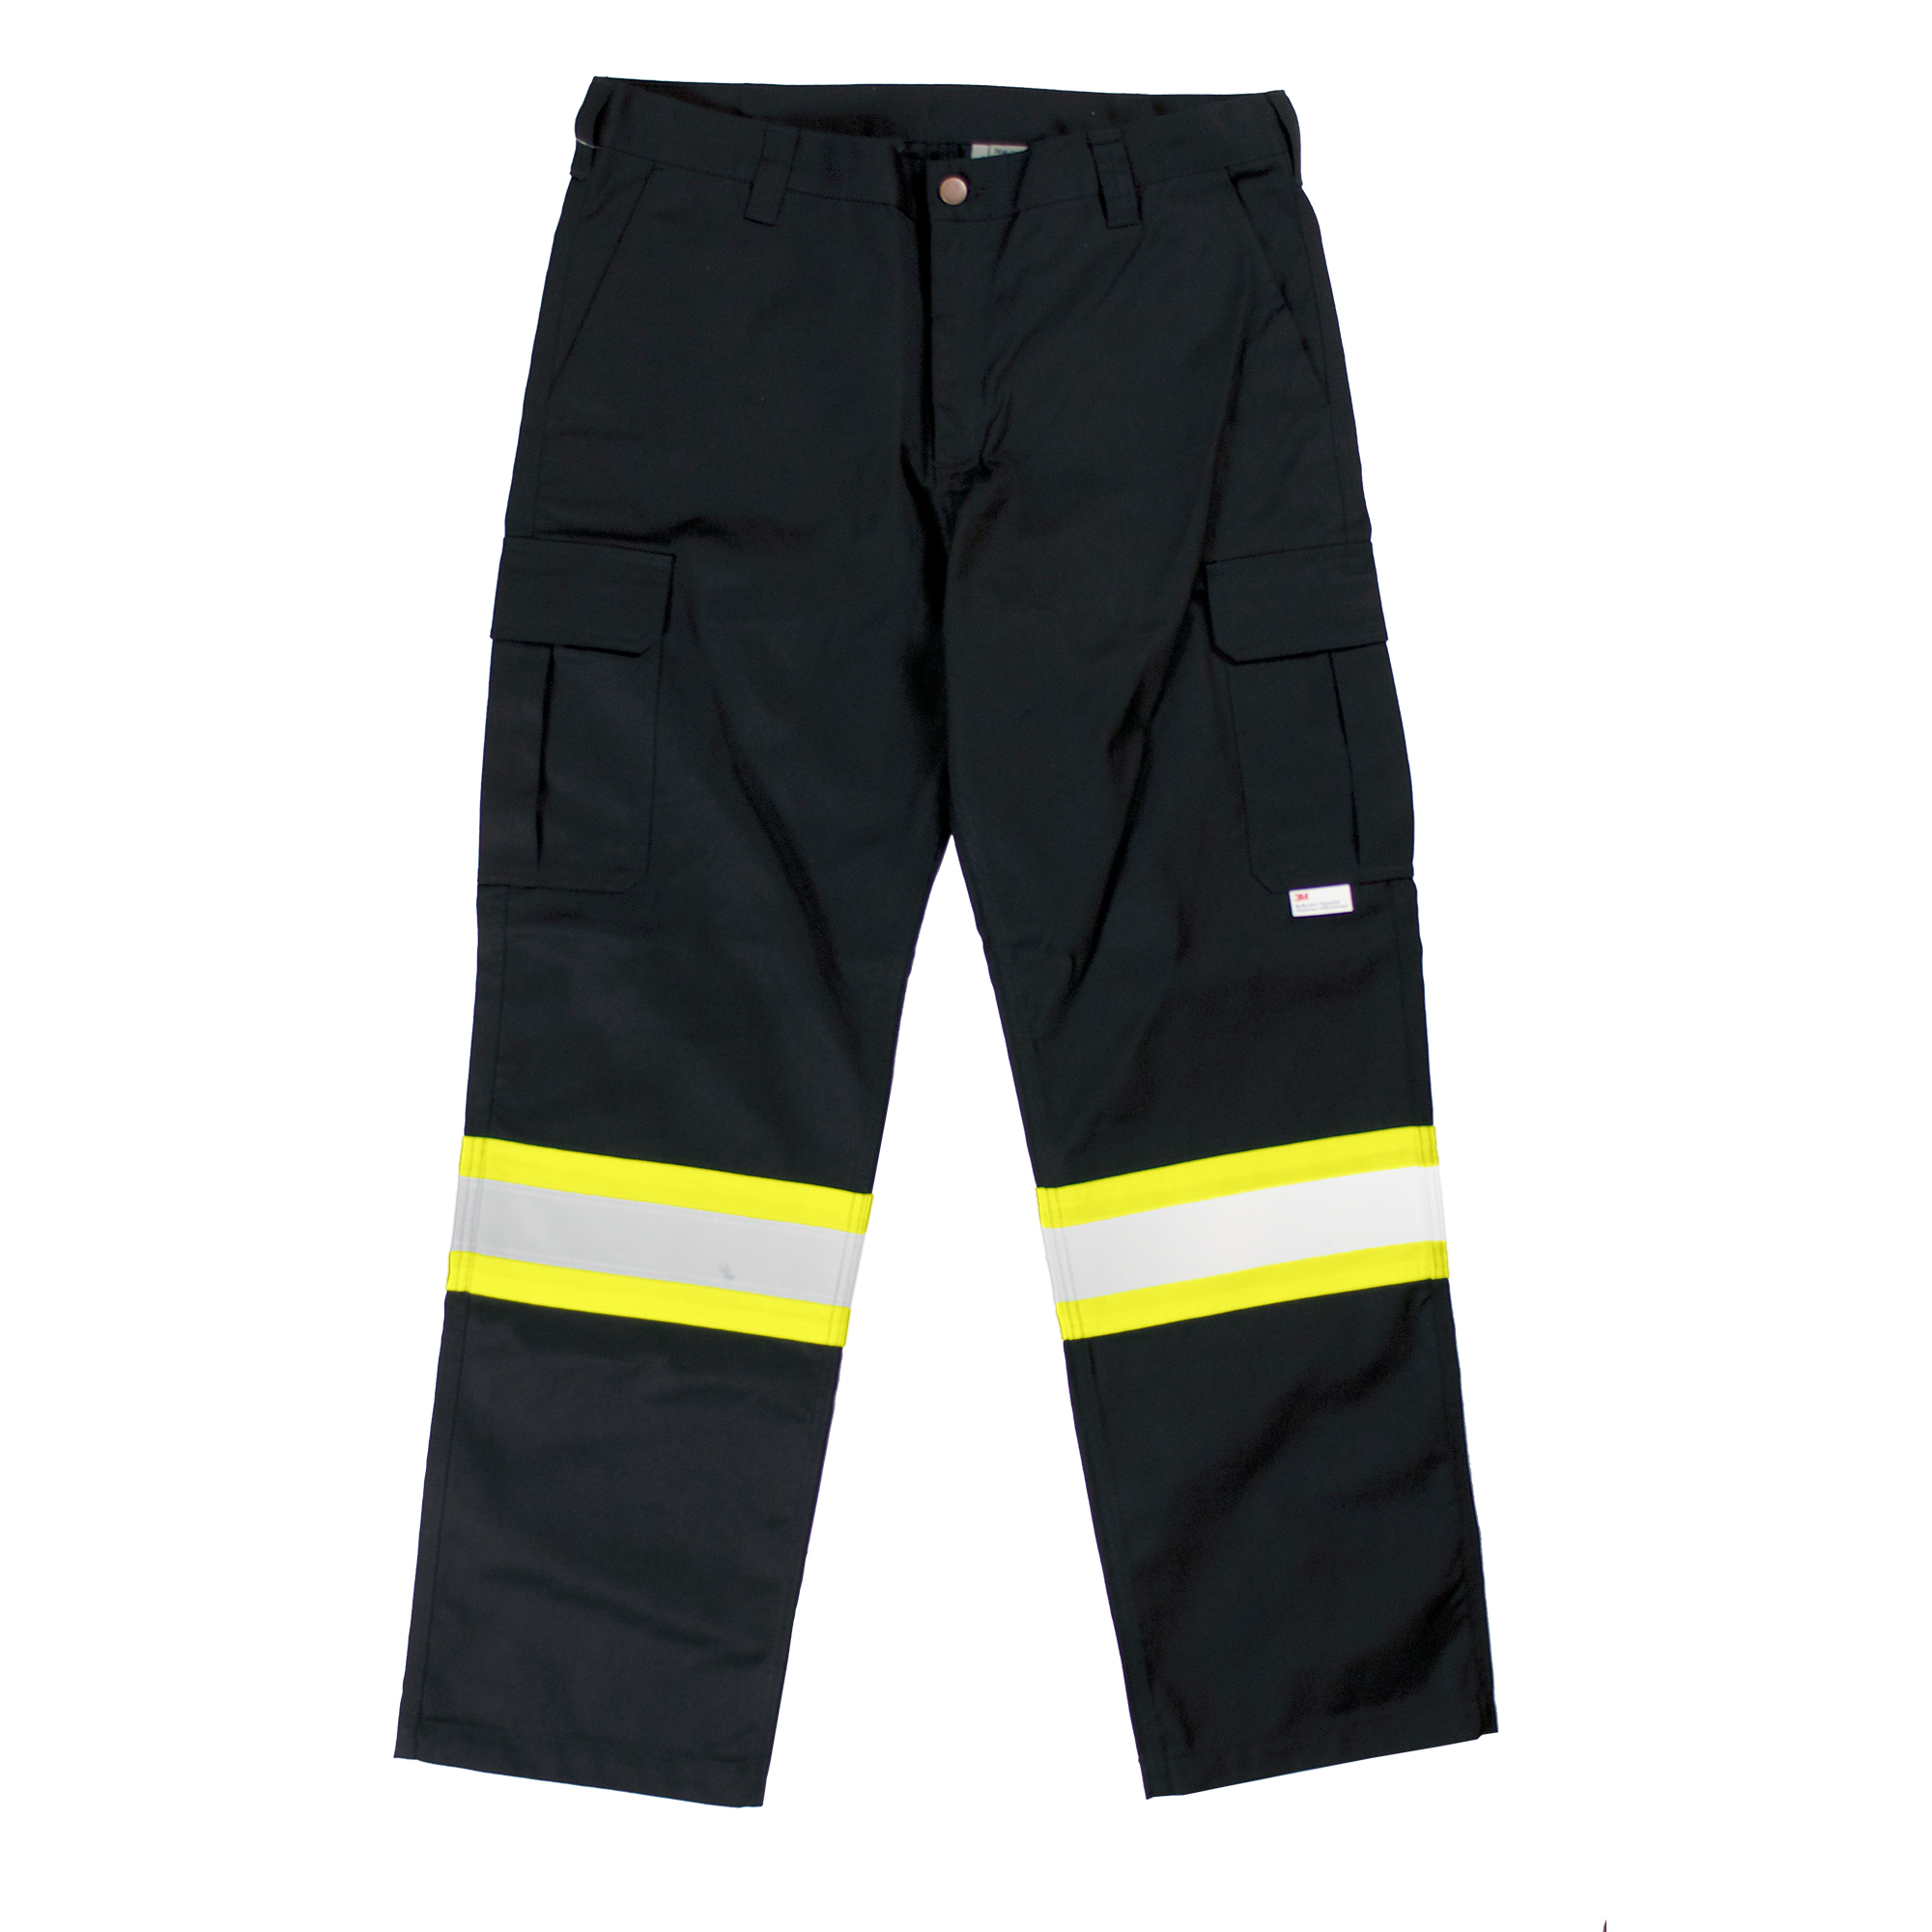 Tough Duck, Safety Cargo Utility Pant, Waist 40 in, Inseam 34 in, Color Black, Model S60741